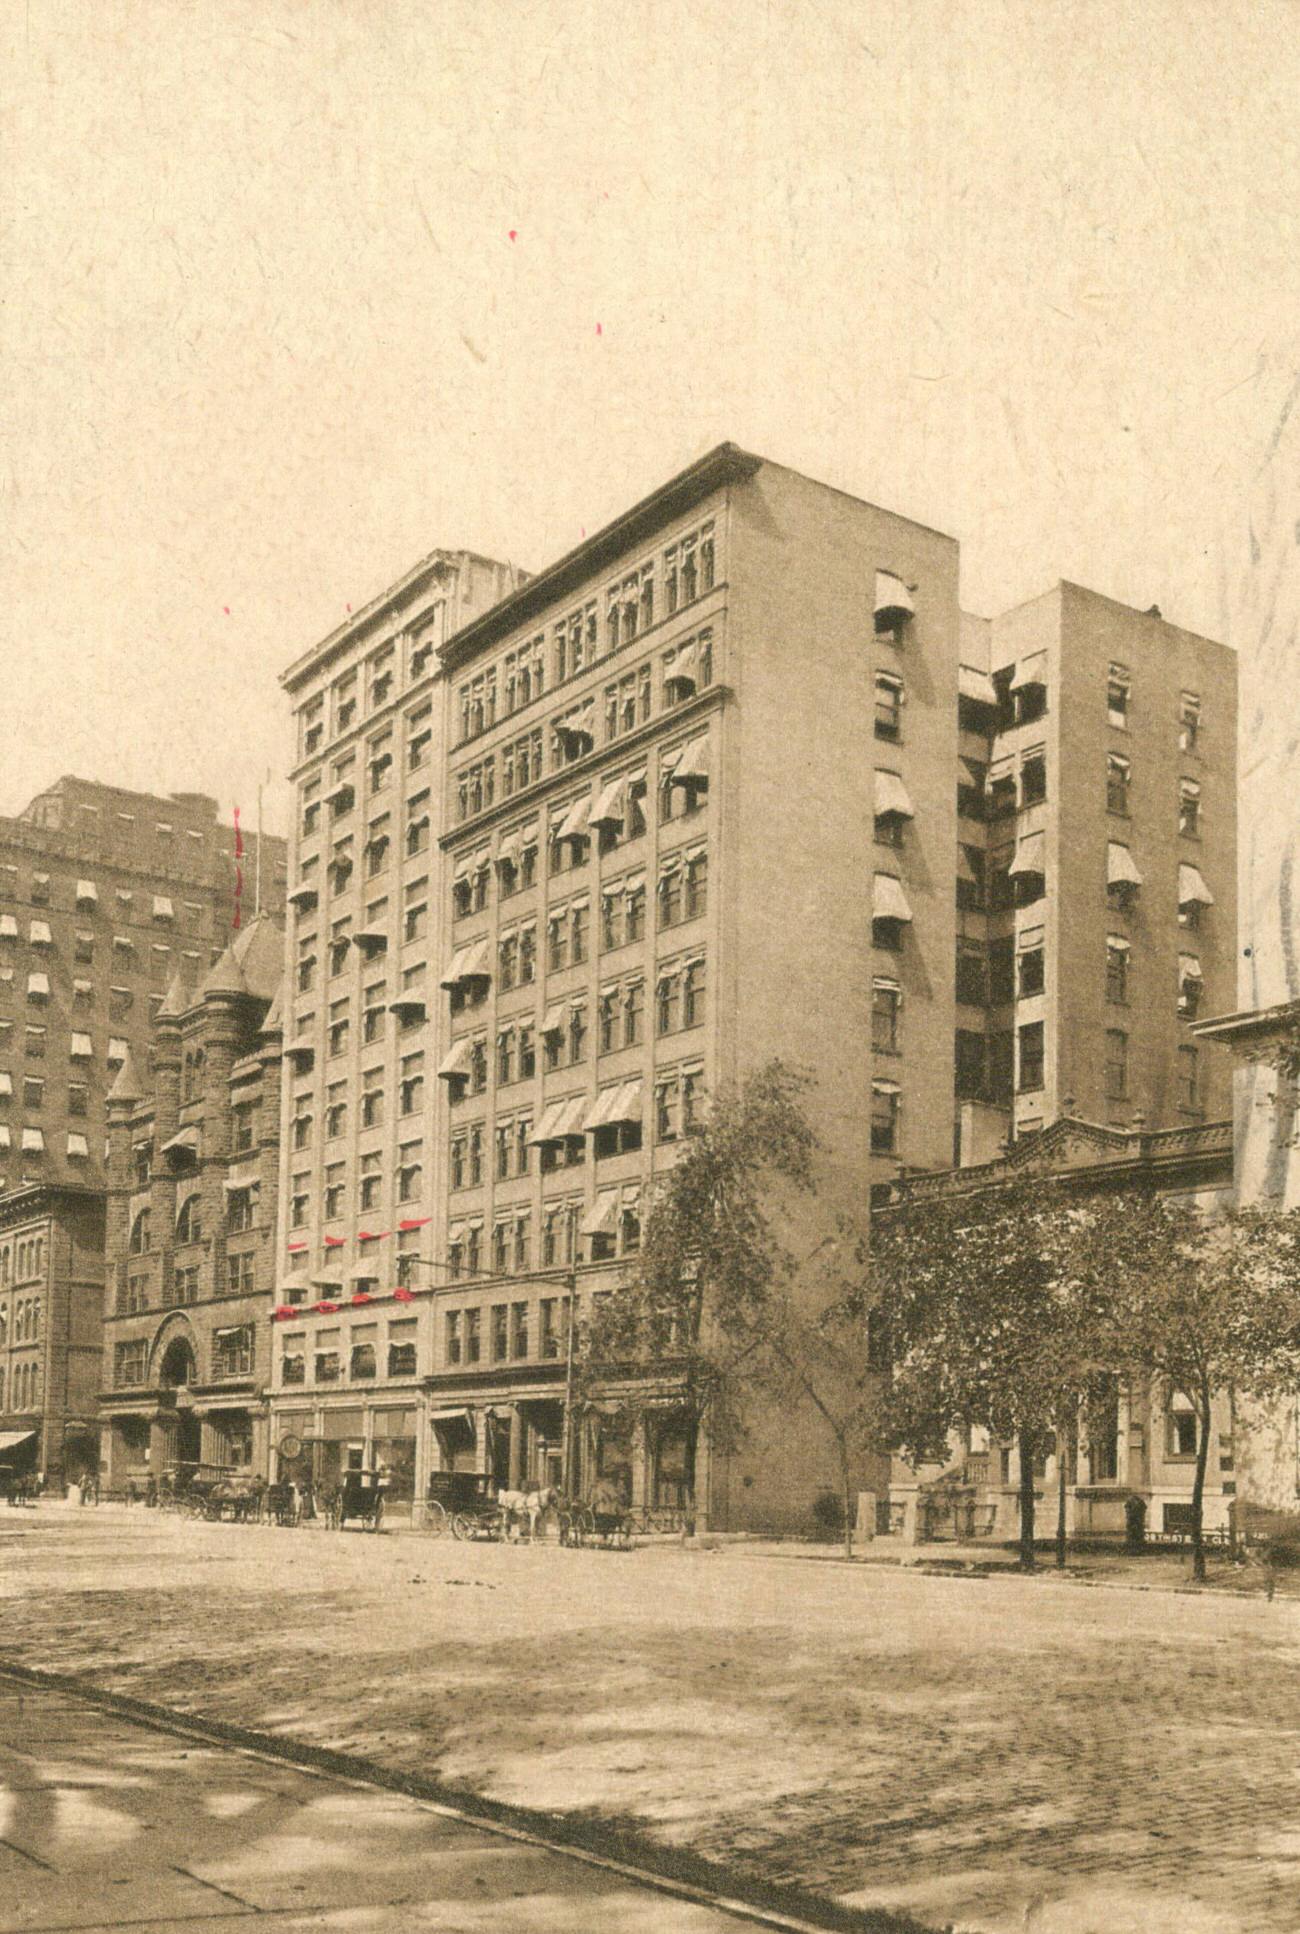 Board of Trade Outlook and Spahr Buildings on Capital Square, view of East Broad Street, sender marks work location, 1880s